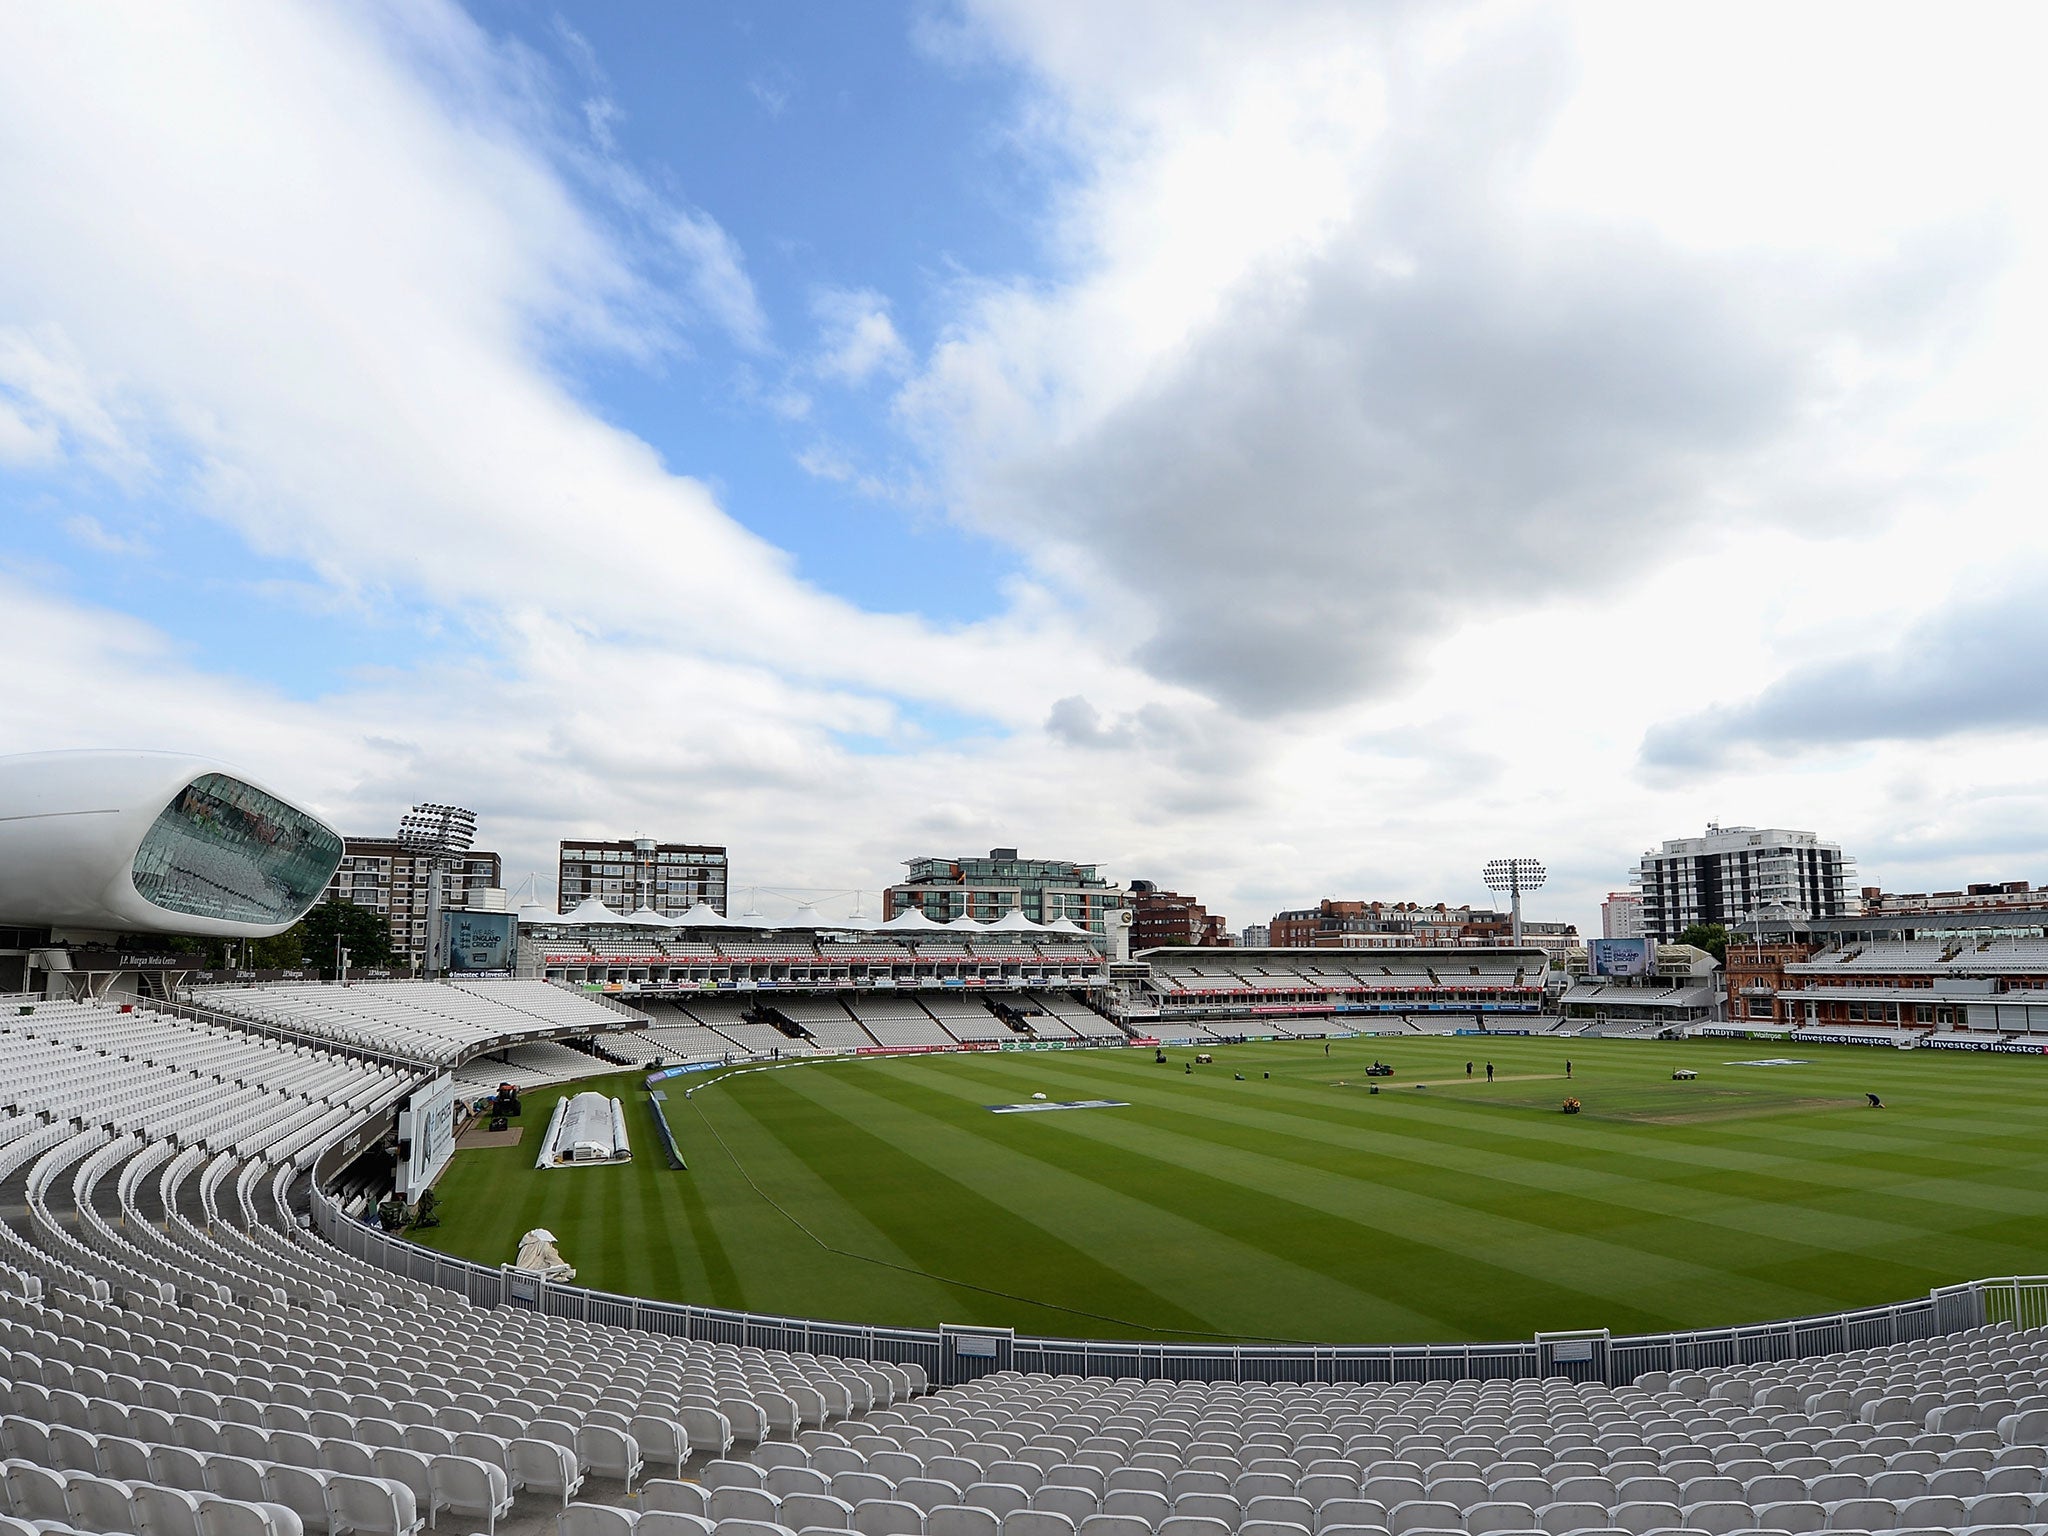 A shot of Lord's Cricket Ground ahead of the Second Ashes Test